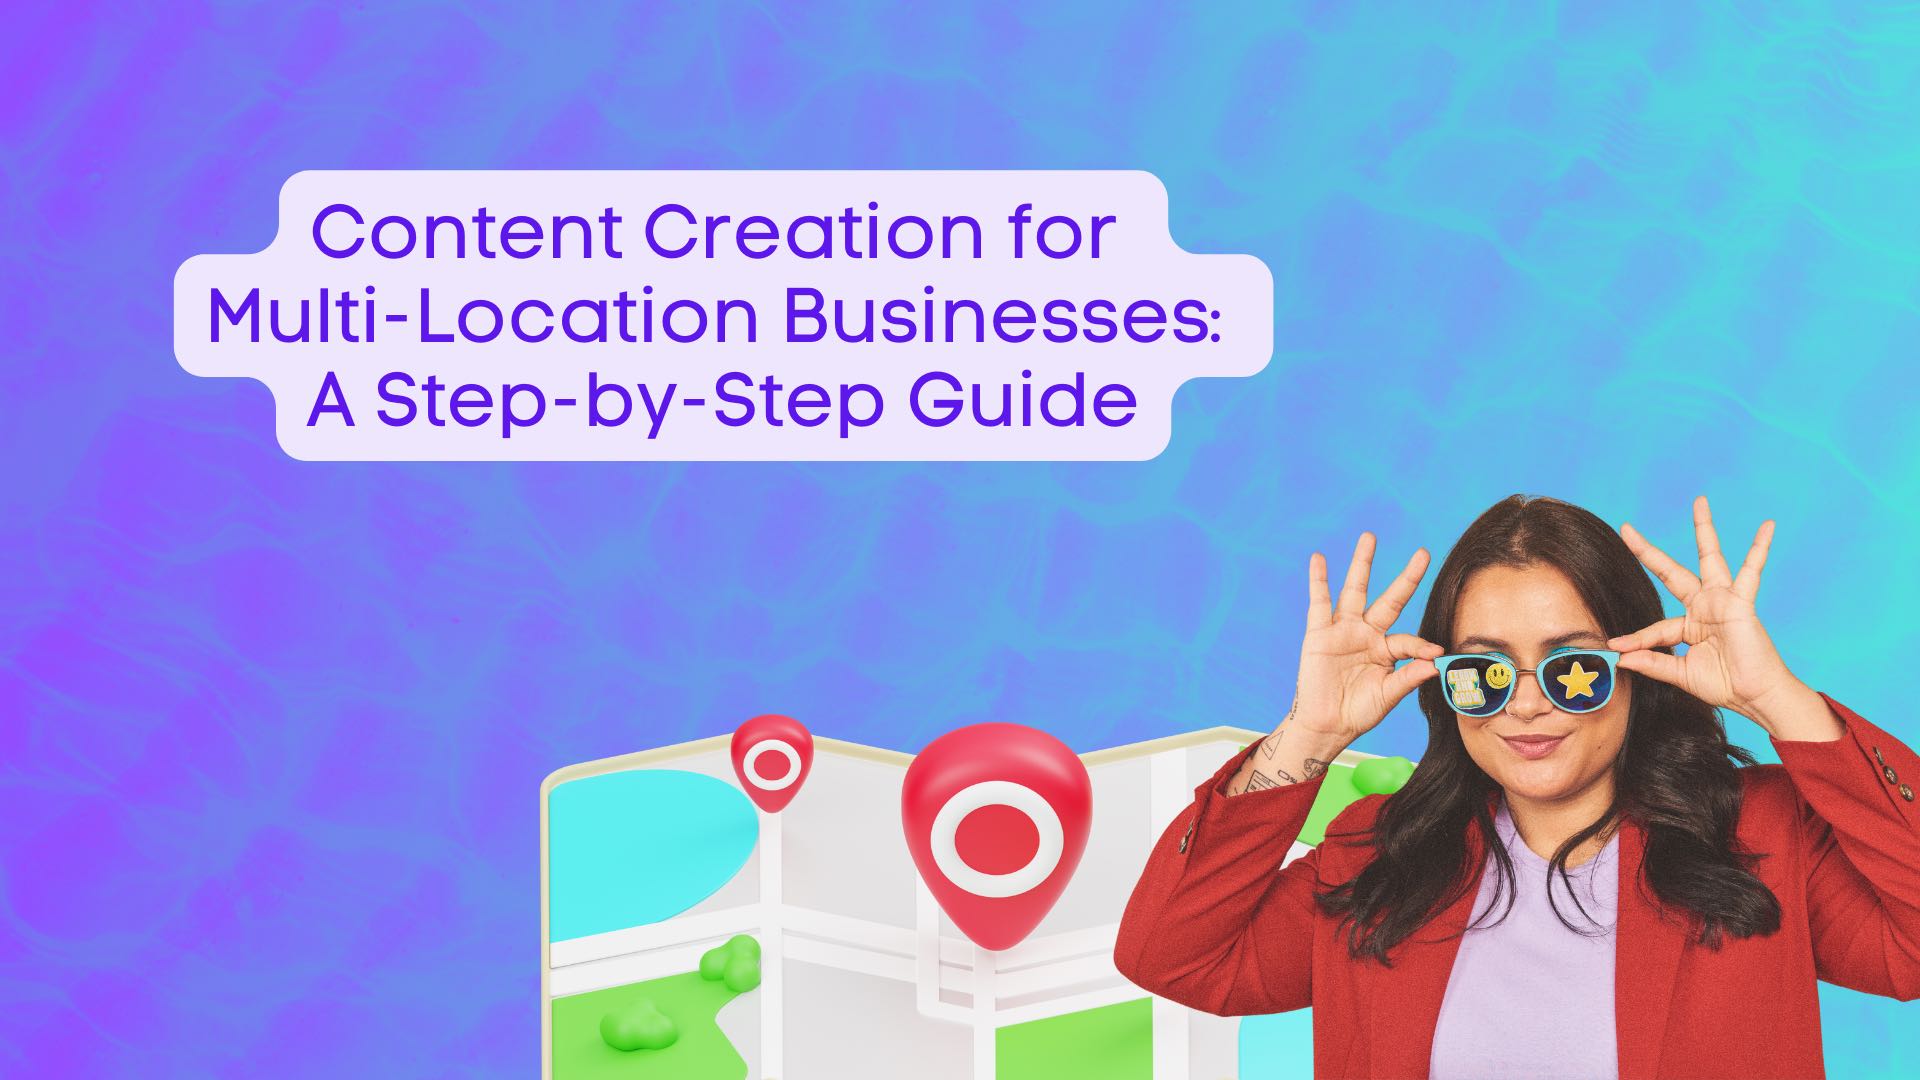 Content Creation for Multi-Location Businesses: A Step-by-Step Guide